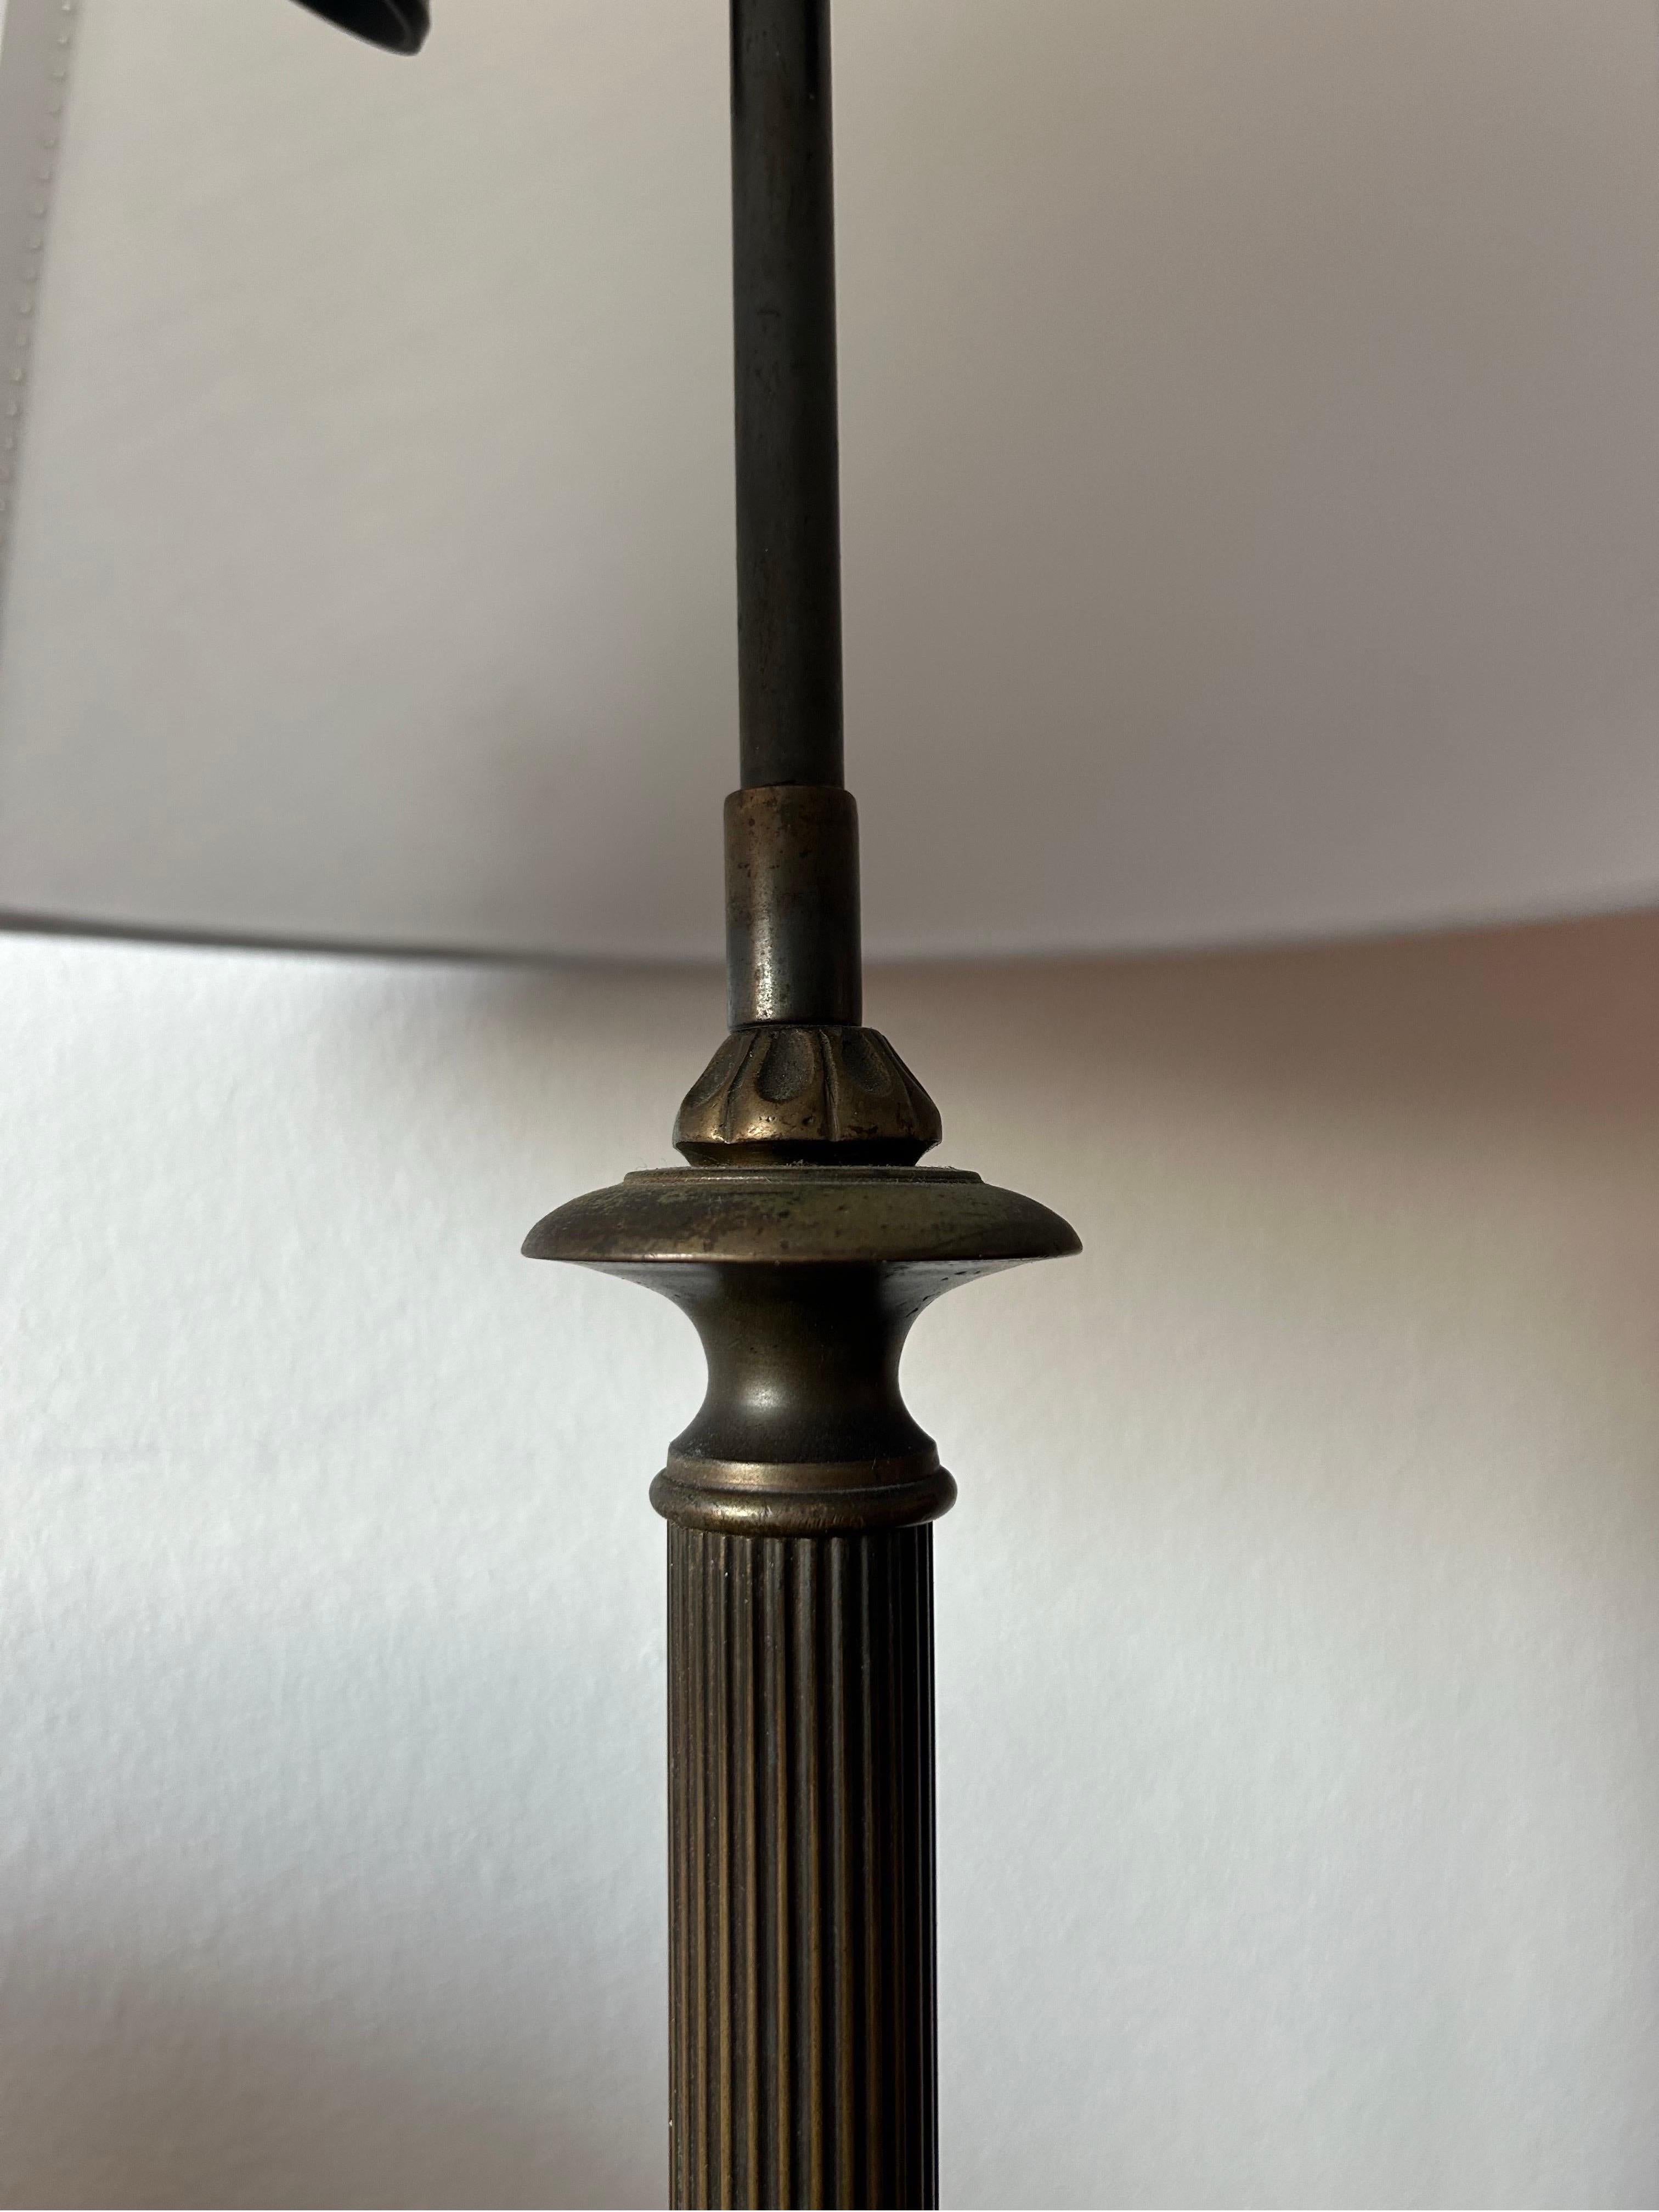 Empire Bronze Table Lamp by Danish Sculptor TH Stein Denmark 1850’s For Sale